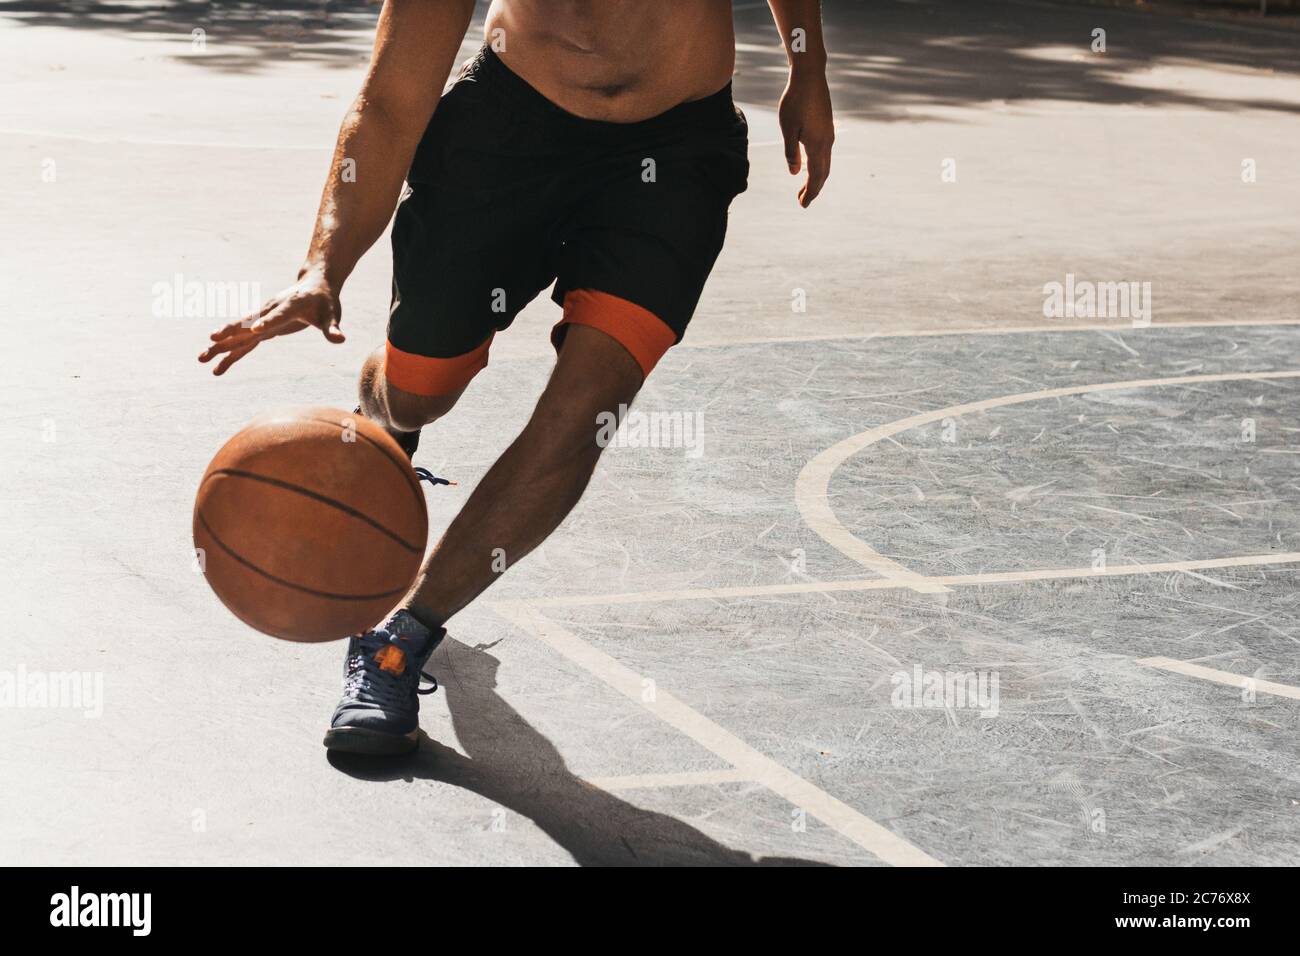 unrecognizable young man playing basketball Stock Photo